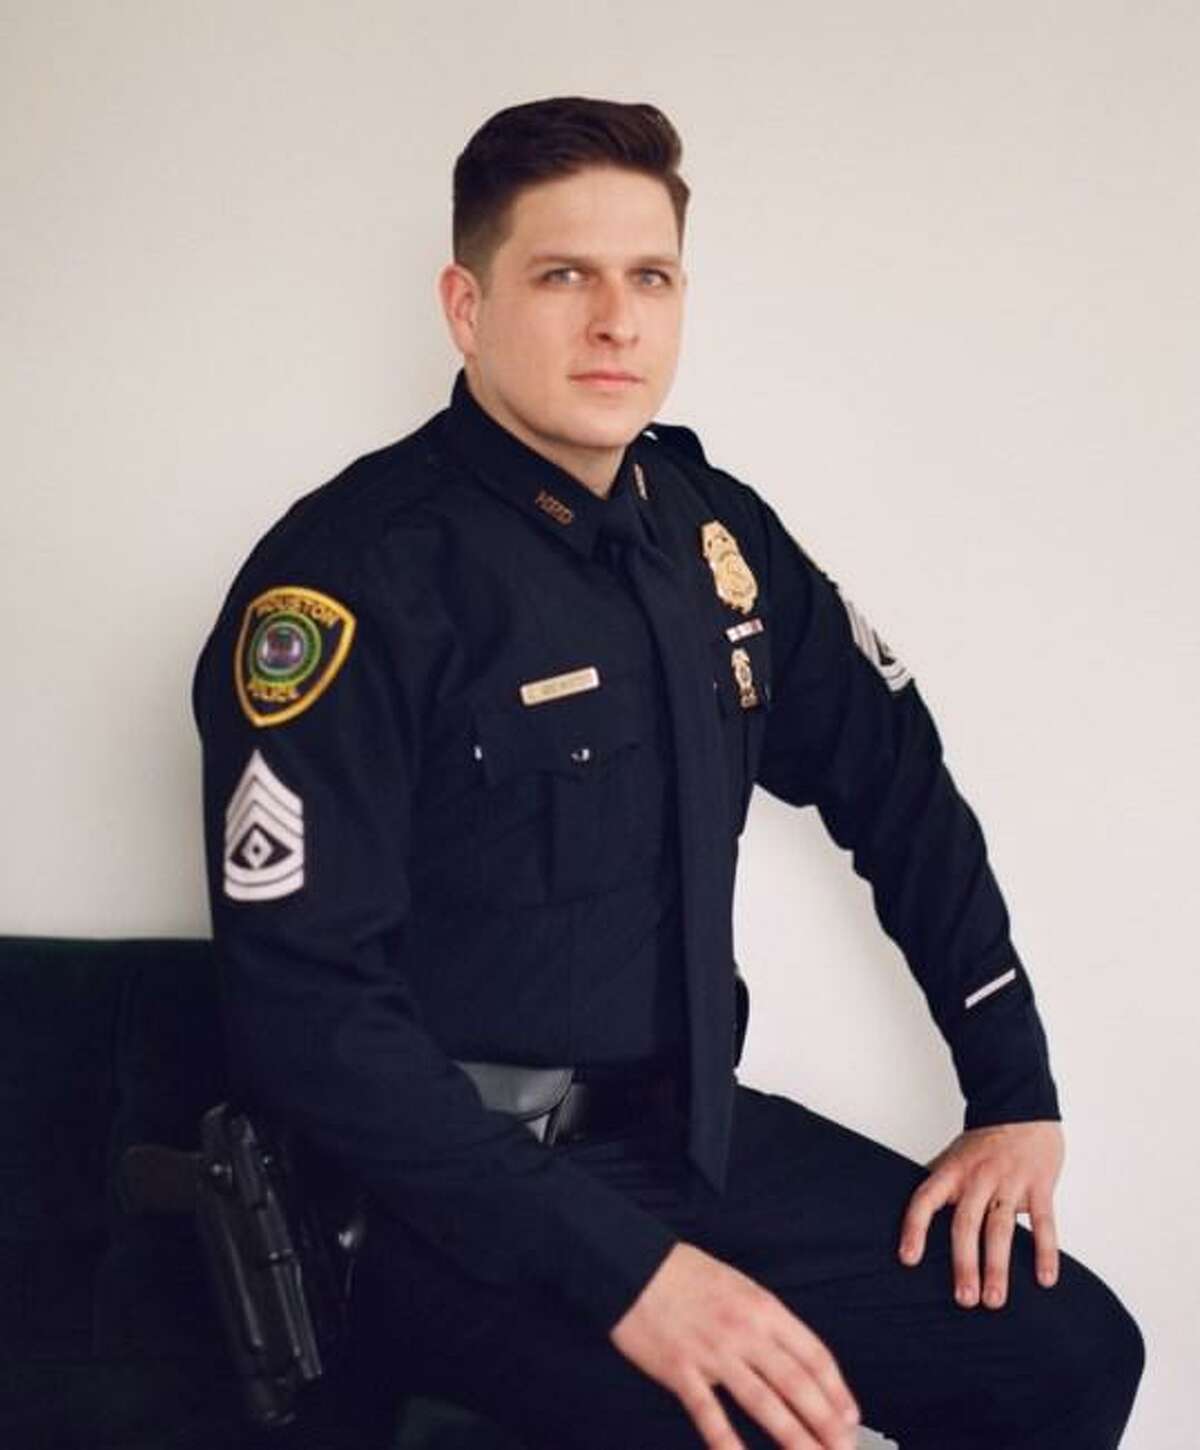 Sgt. Christopher Brewster, Houston Police Department.